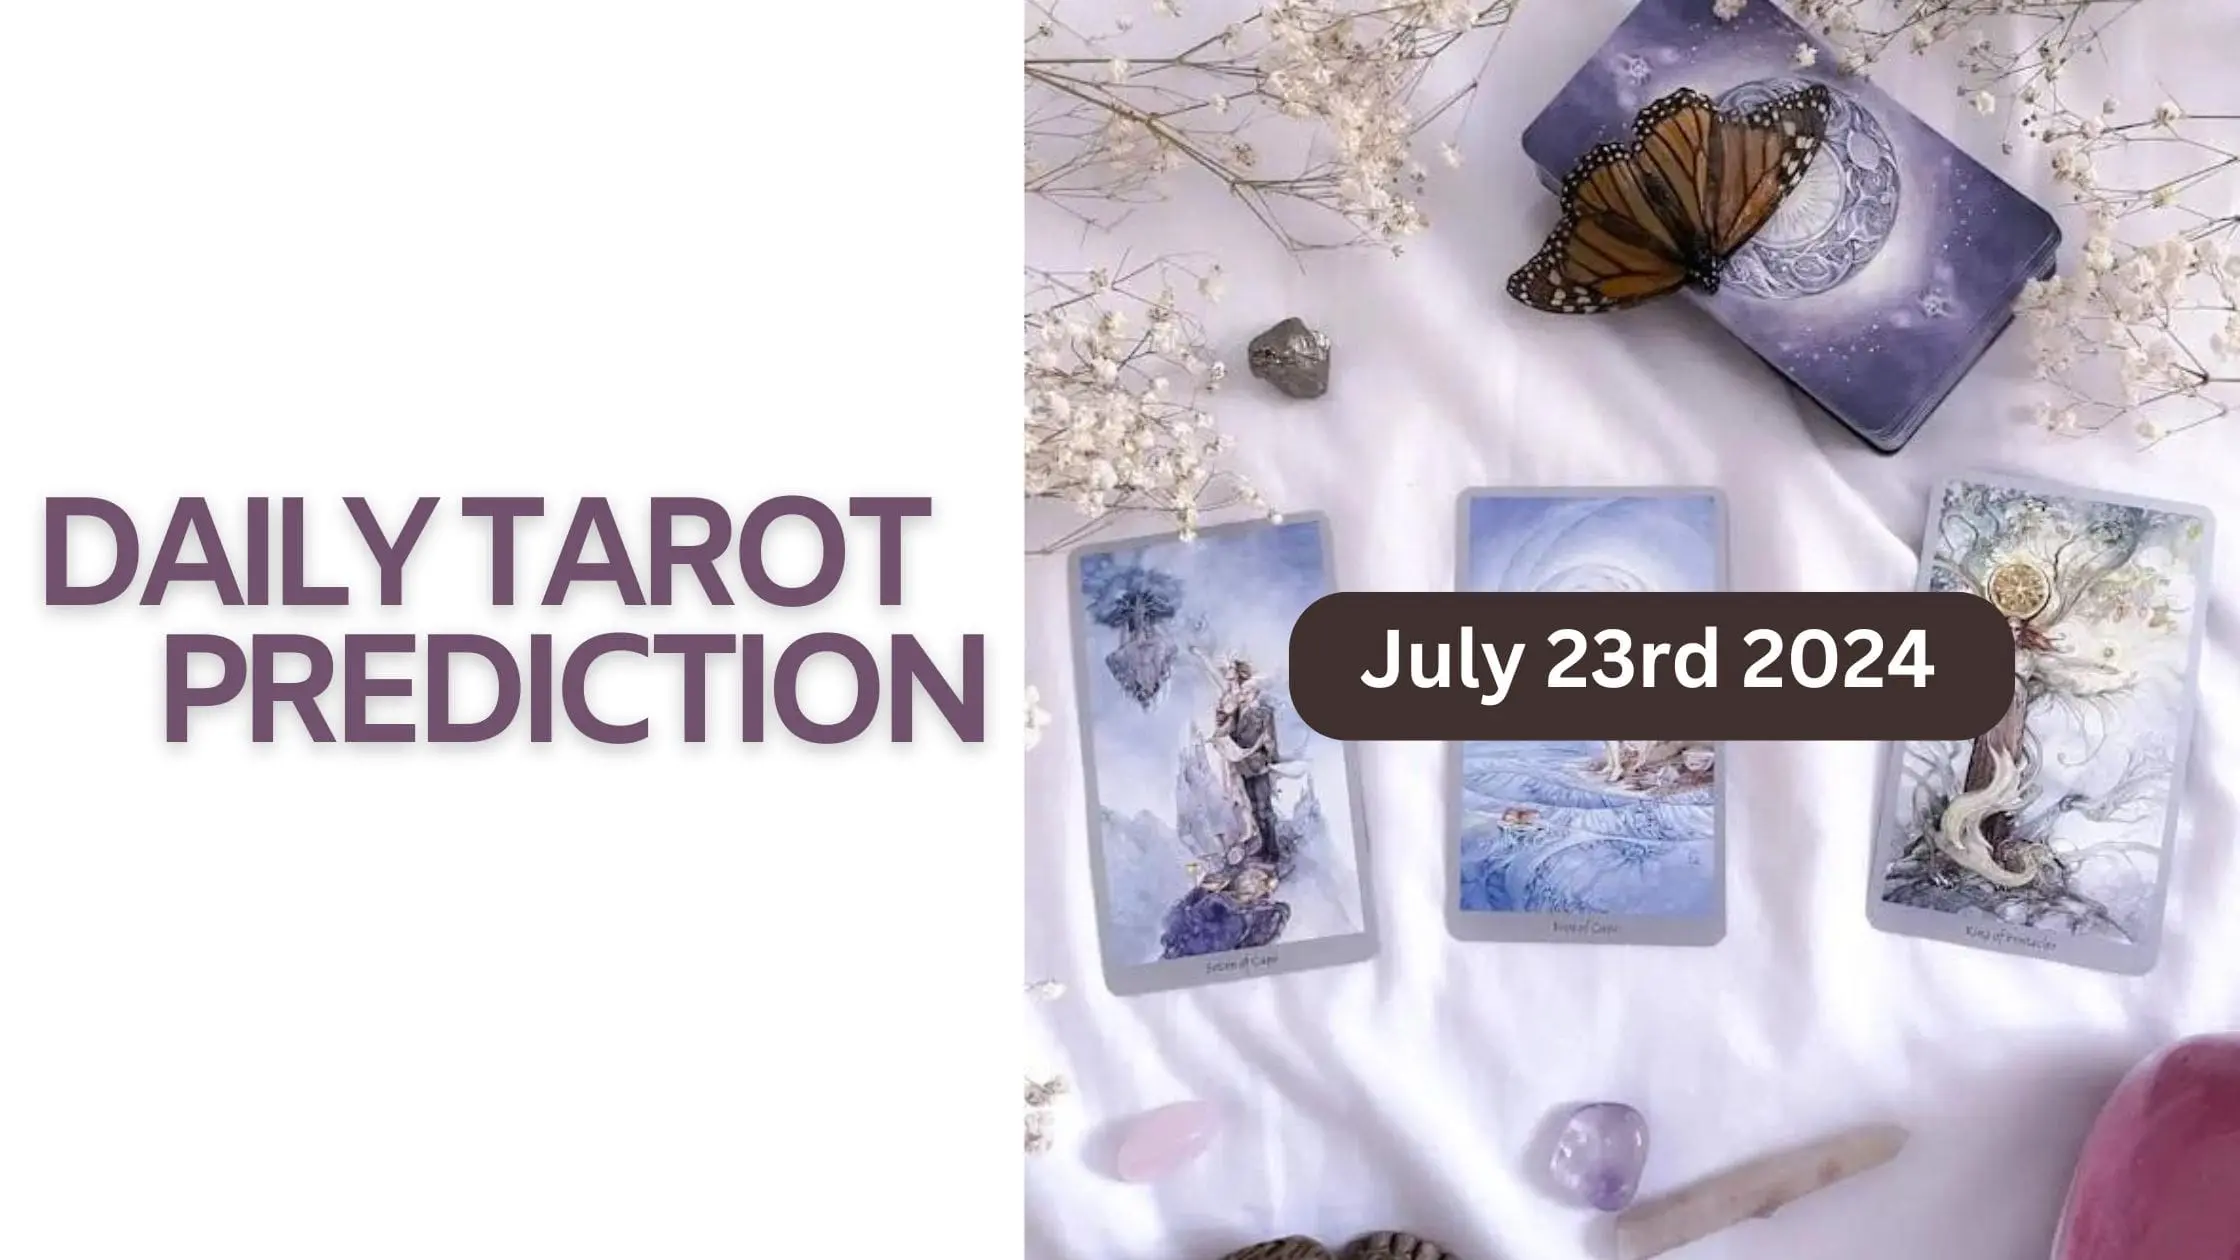 Tarot Card Reading For July 23rd 2024